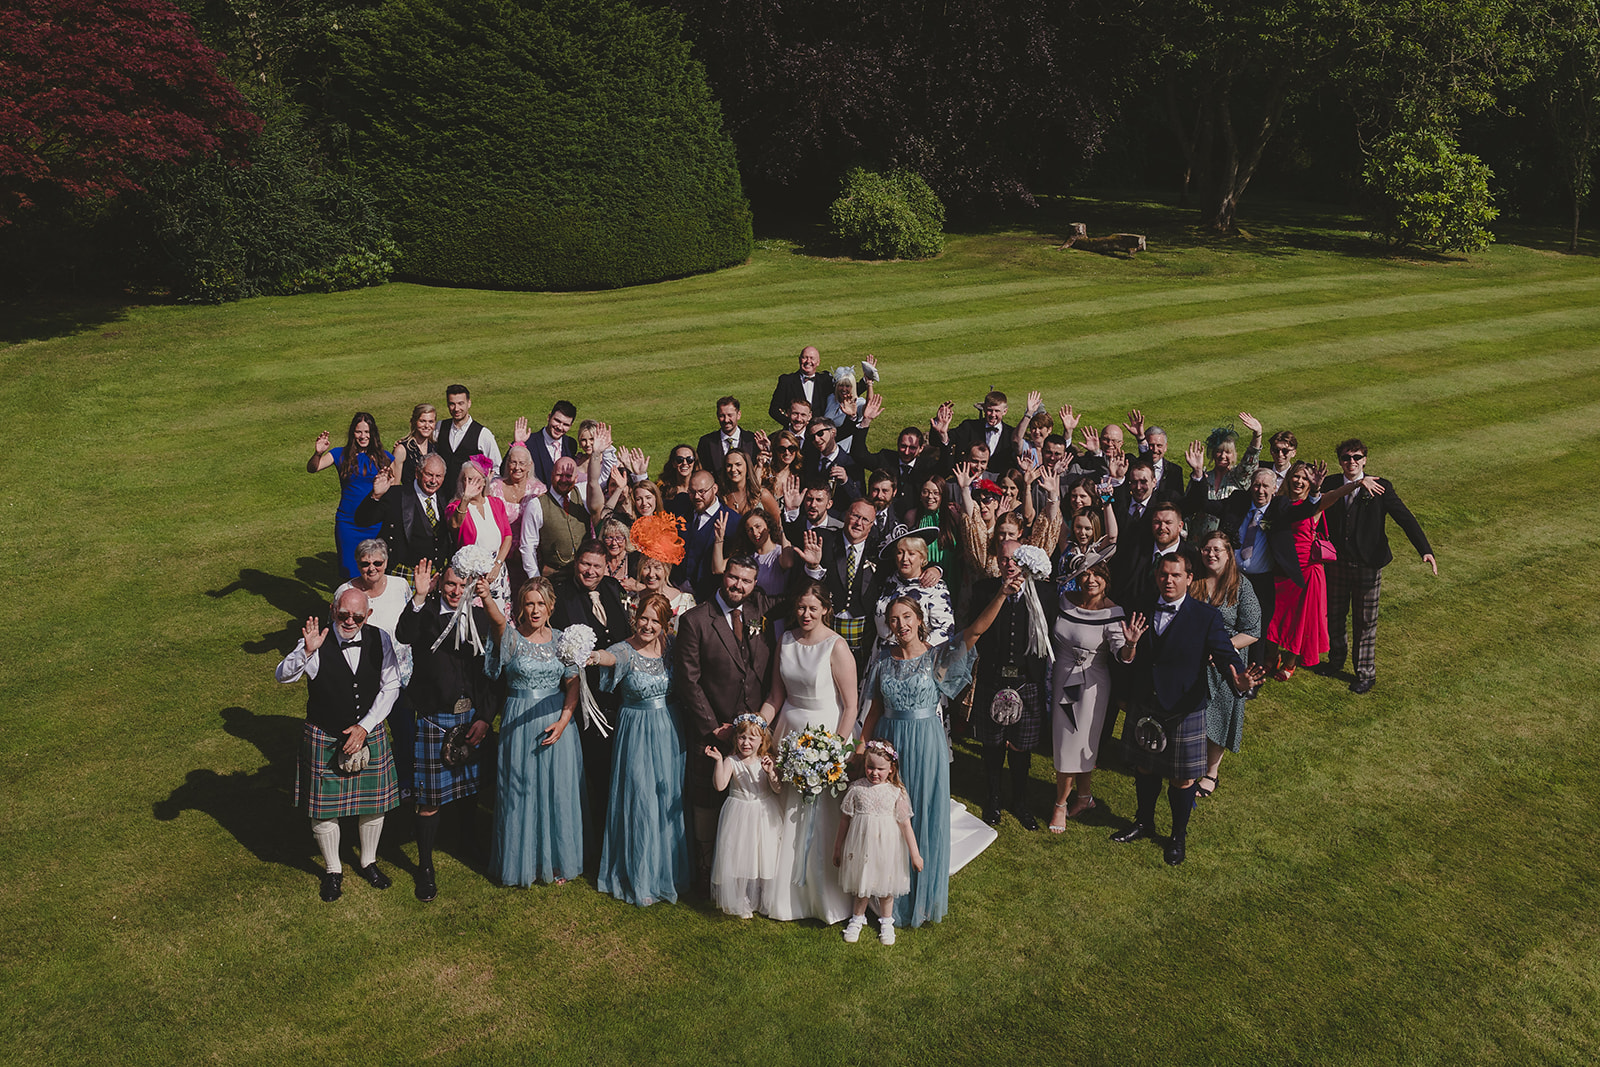 An aerial group photos of the wedding guests standing together on the grounds of Elsick House waving to the camera.